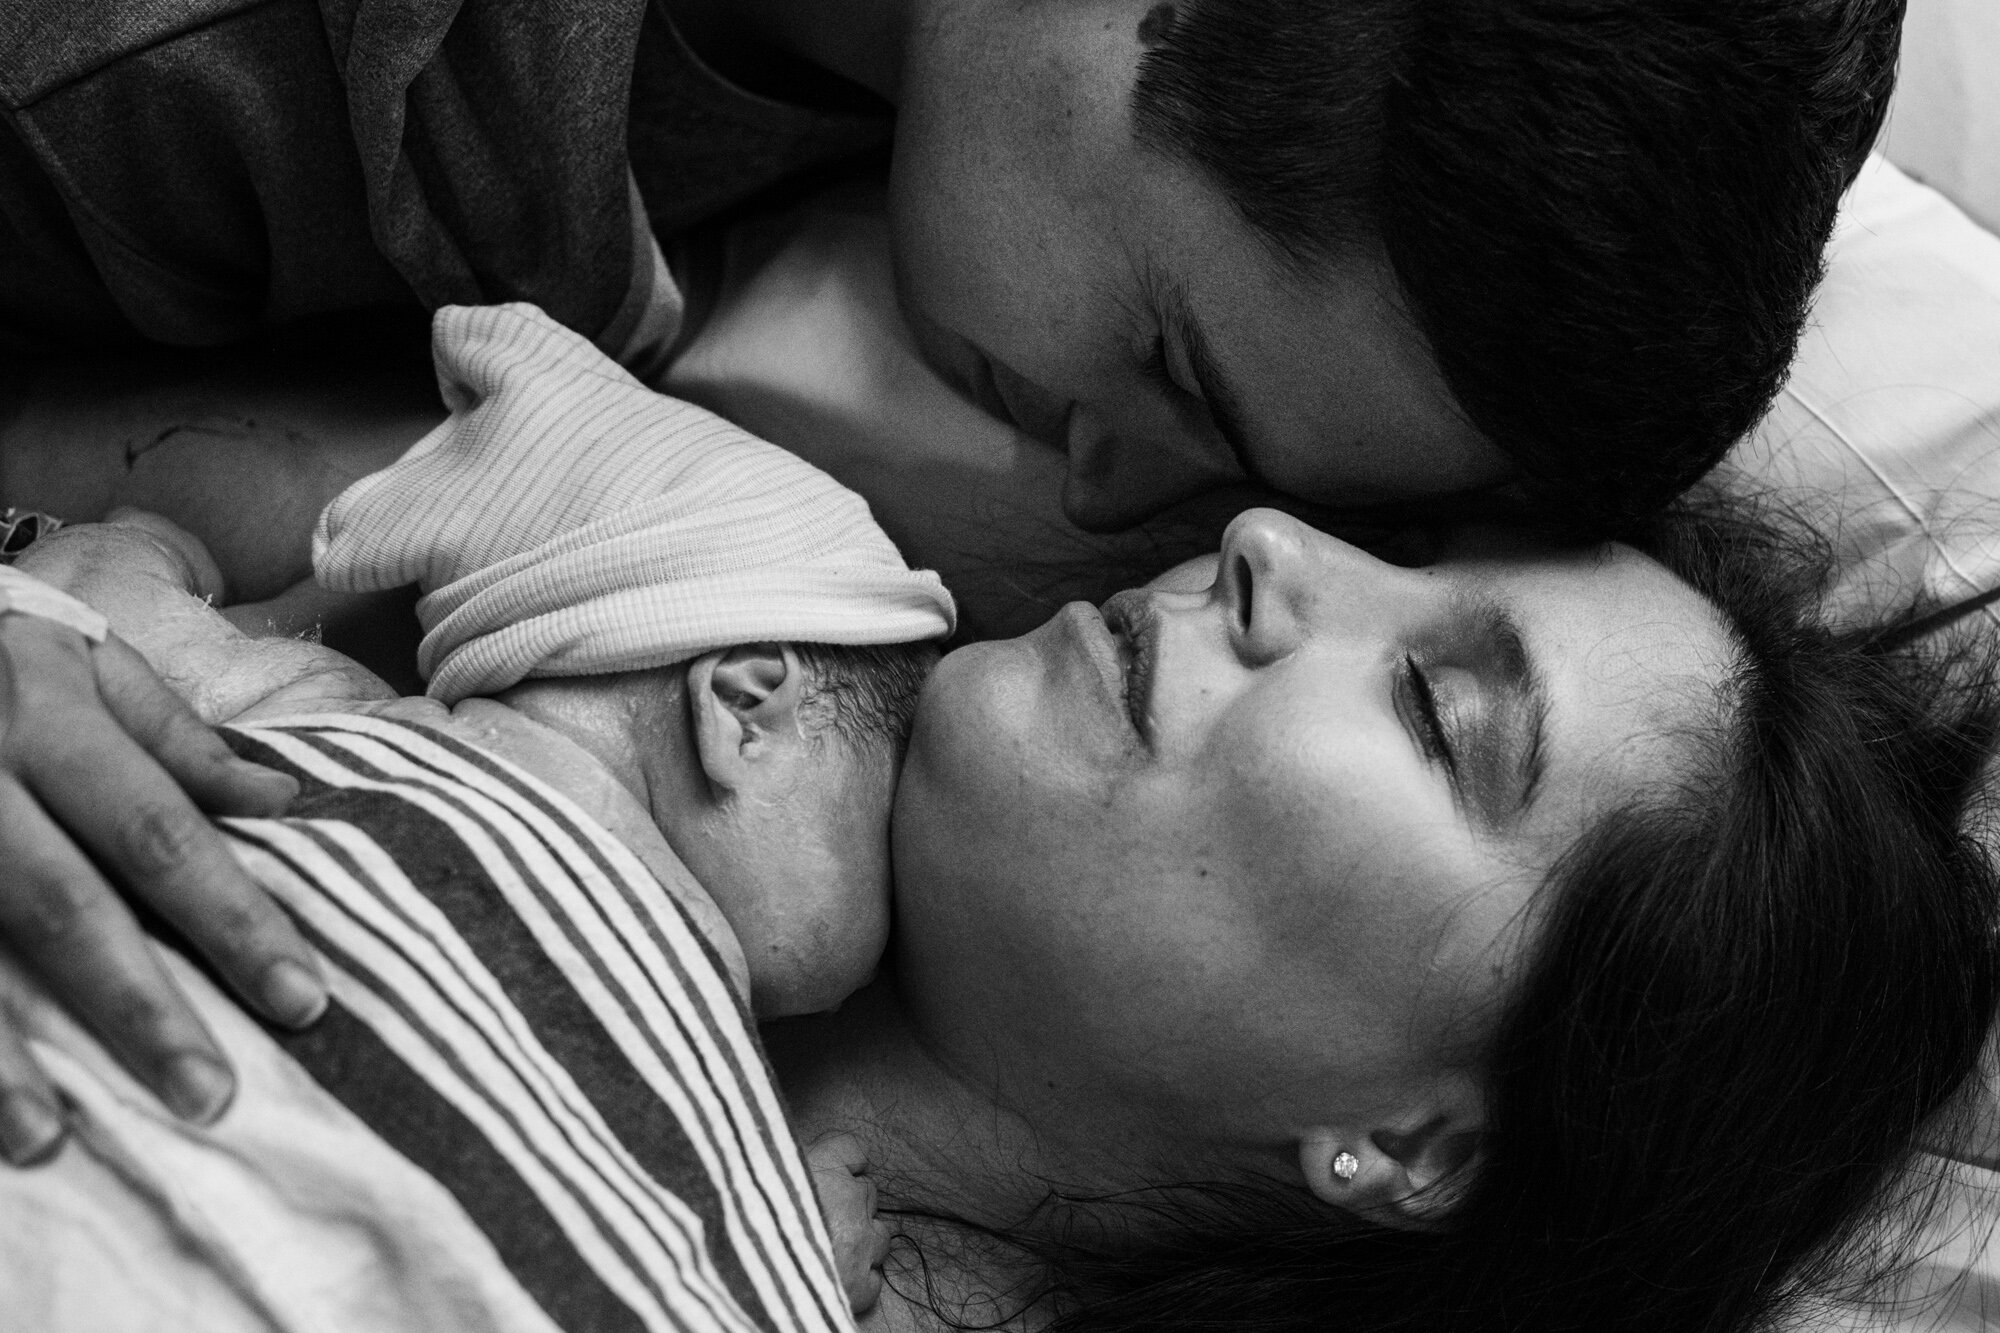 jacksonville birth parents snuggling close with their newborn baby boy just after birth